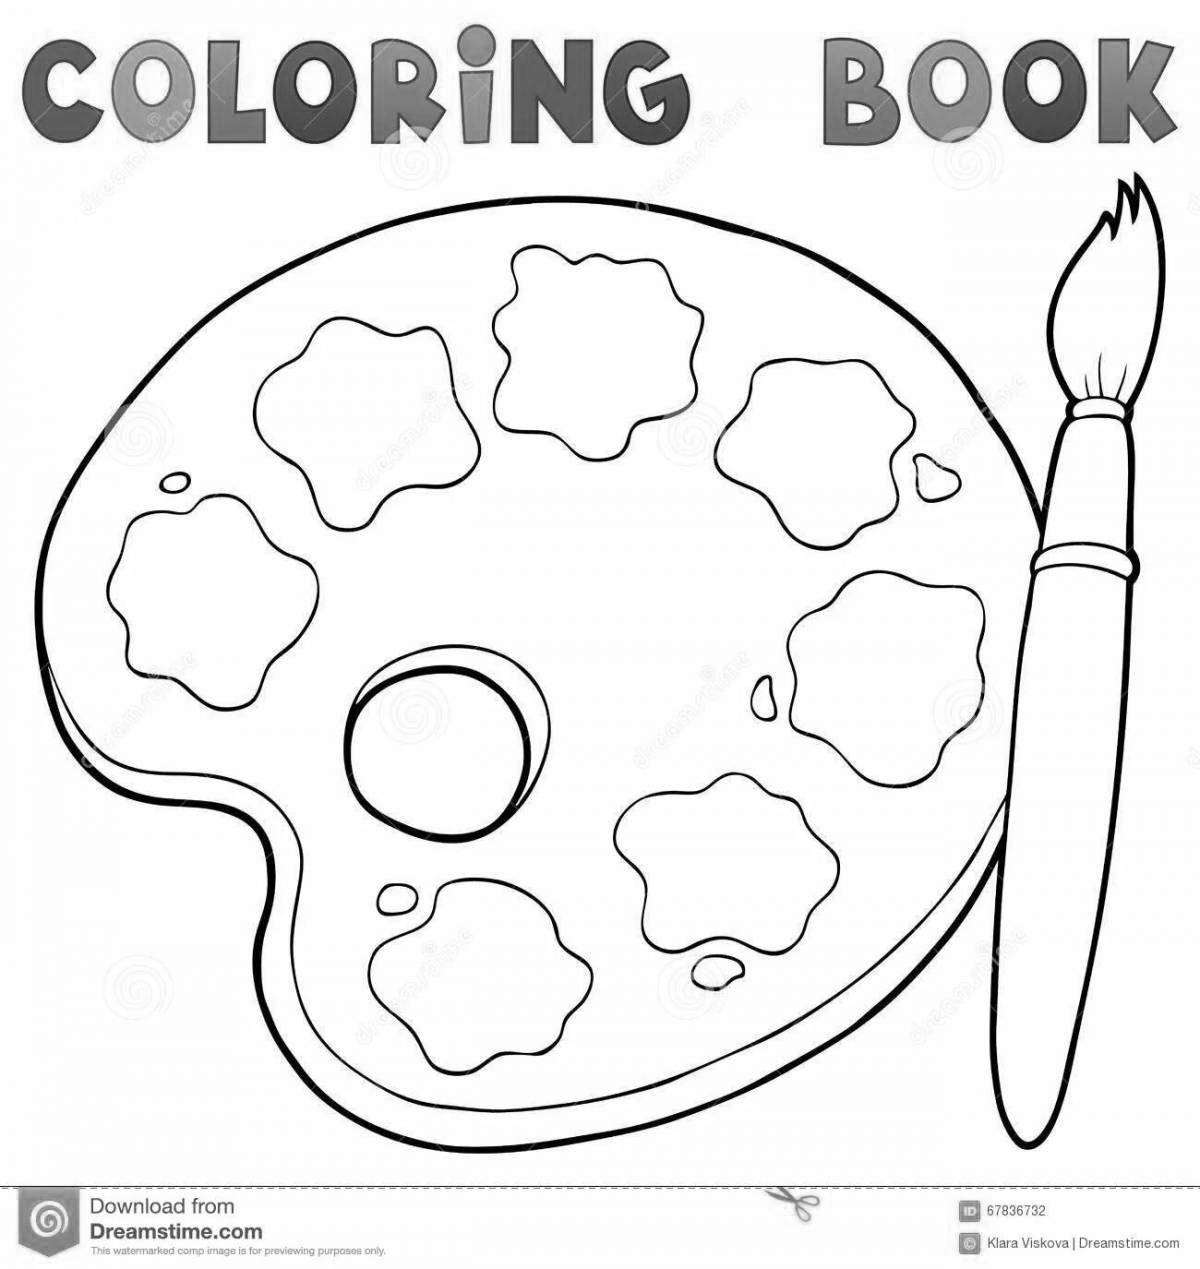 Adorable coloring pages for children over 3 years old